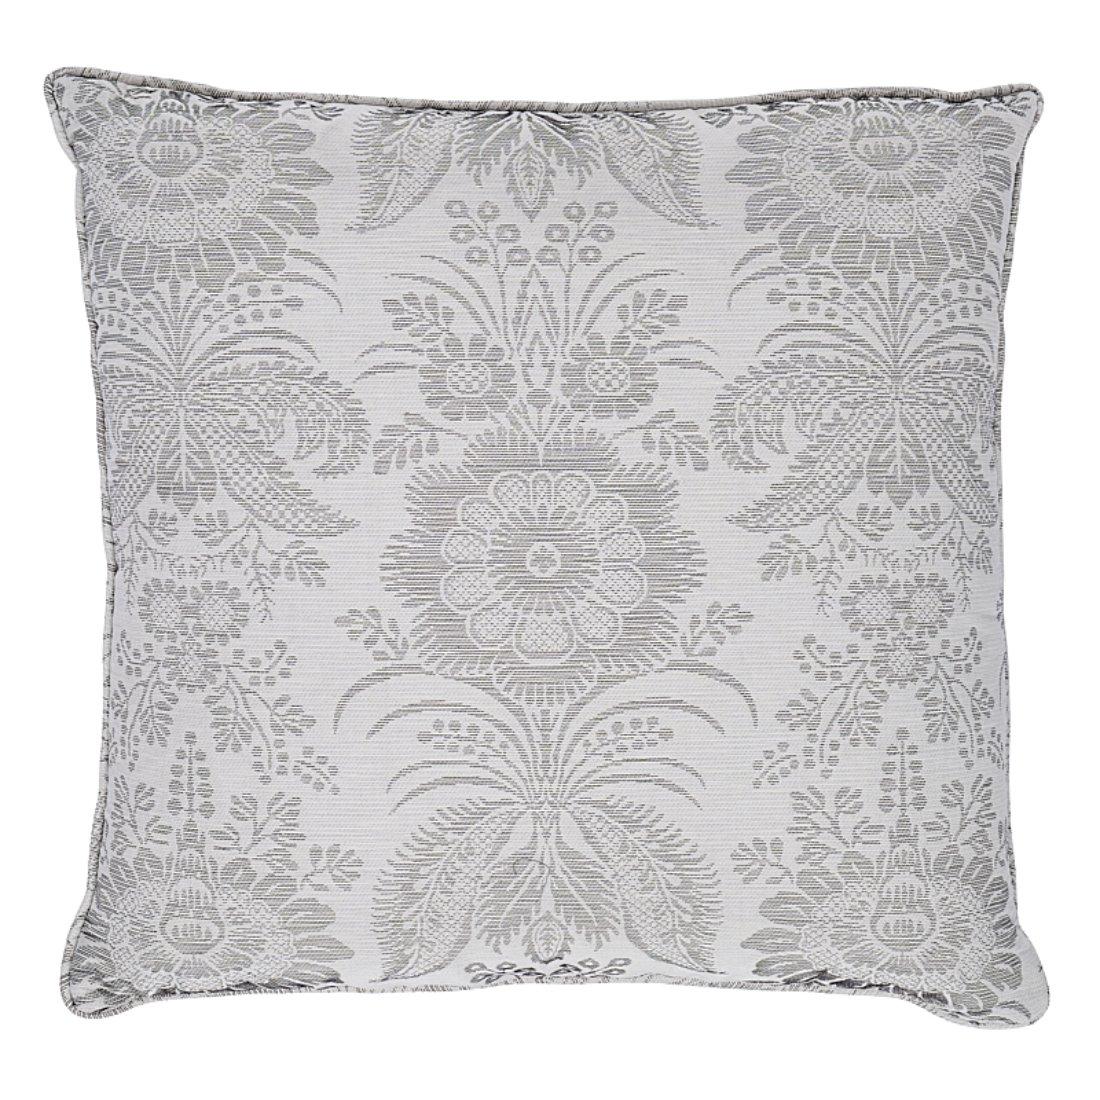 This pillow features Greta with a self welt finish. A beautiful mid-scale floral with the look of a damask, Greta has an elevated mirrored motif that’s tempered by an easygoing cotton-and-linen-blend fabric. Pillow includes a feather/down fill